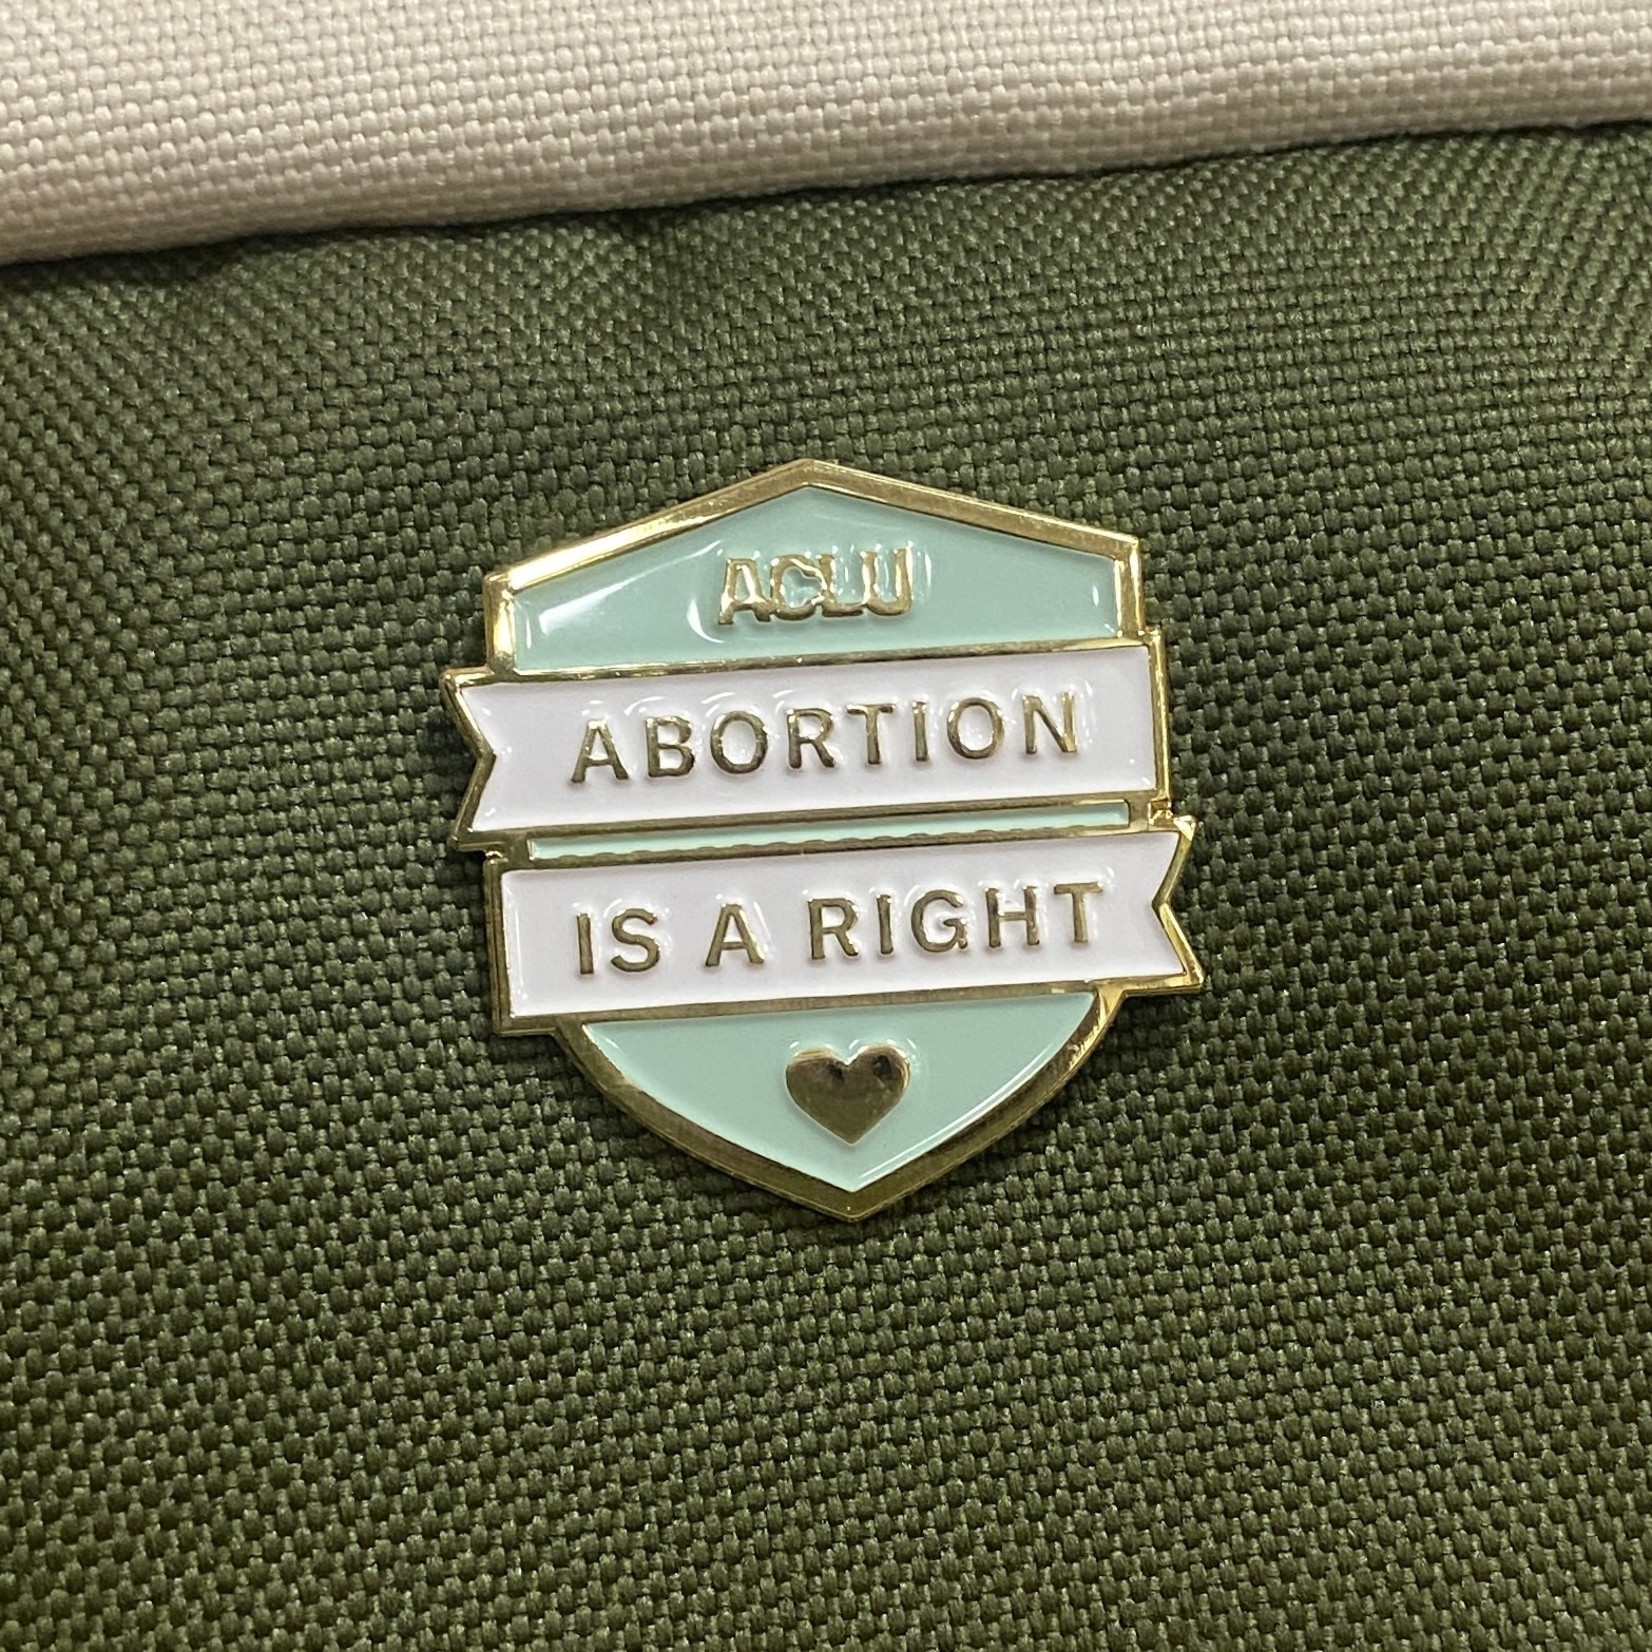 ACLU Abortion is a Right pin - 100% of Sales goes to the ACLU of Indiana